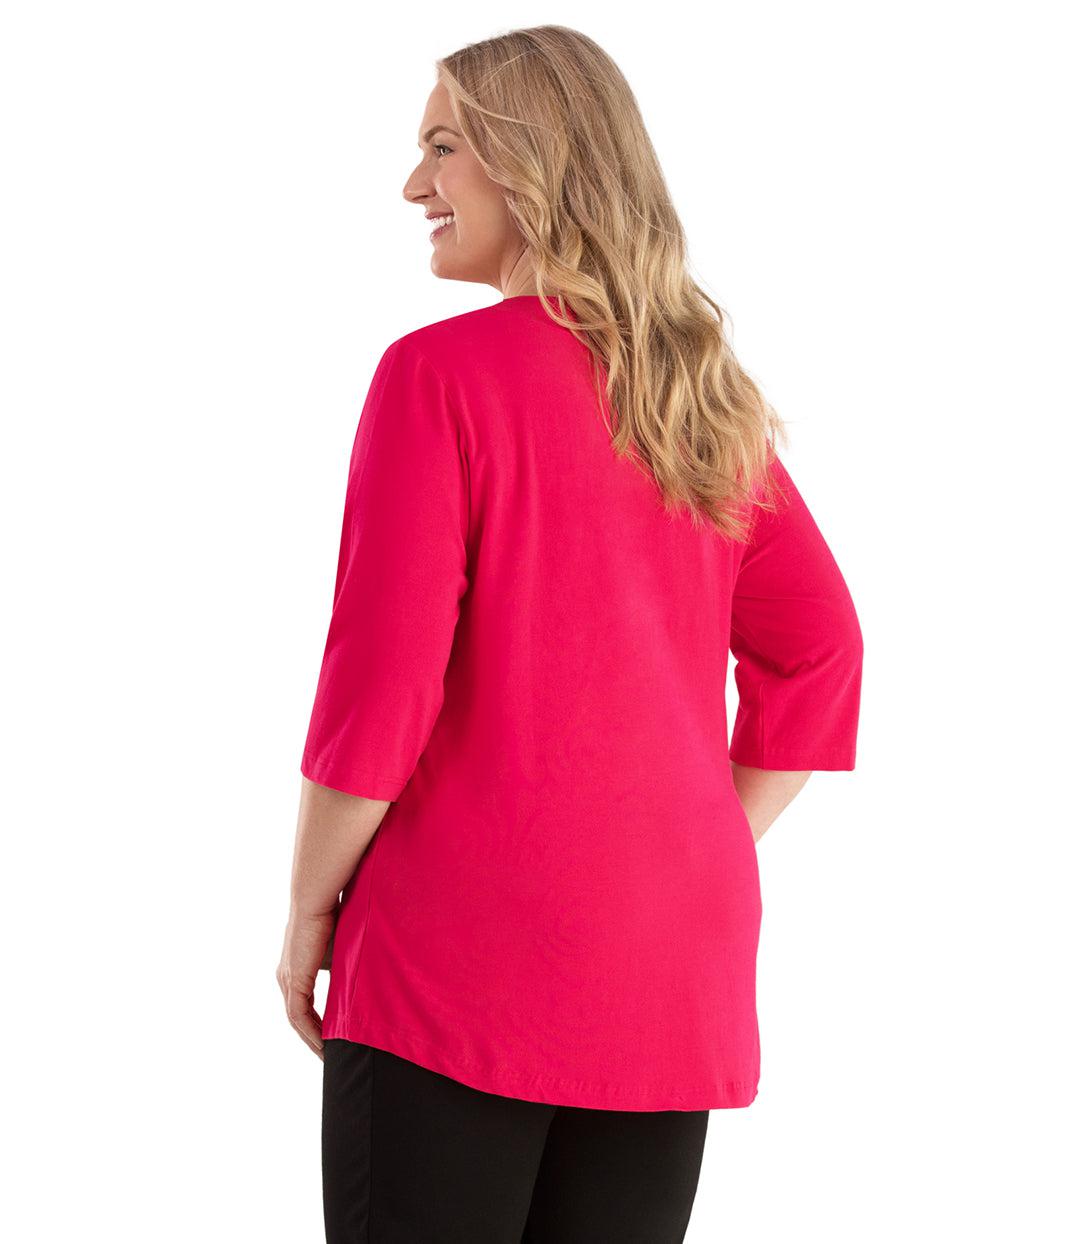 Plus size woman, facing back looking left, wearing JunoActive plus size Stretch Naturals Vee NeckTee in the color Pink. She is wearing JunoActive Plus Size Leggings in the color Black. 